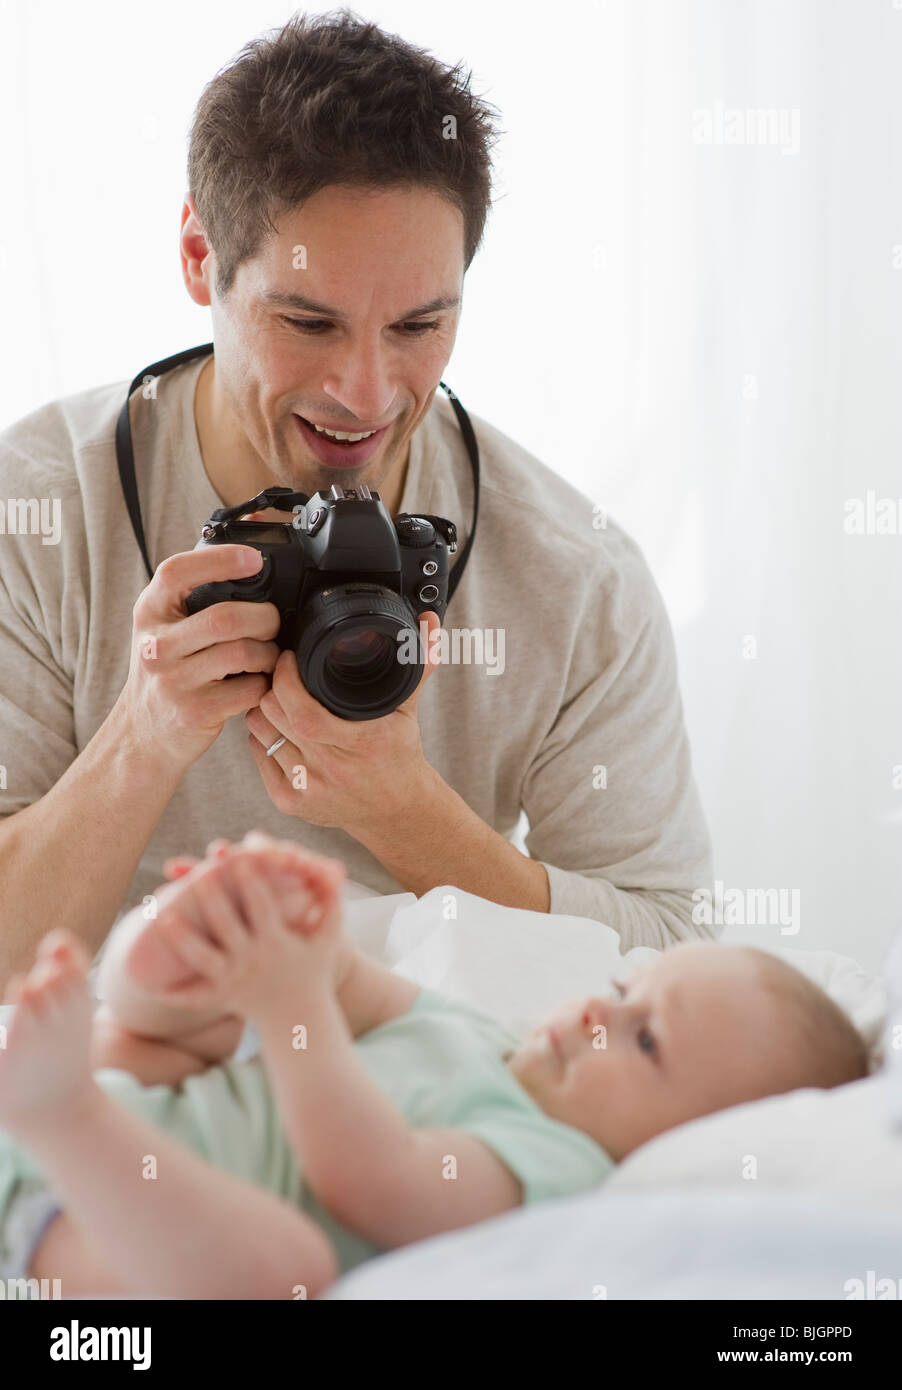 Father taking photograph of baby Stock Photo